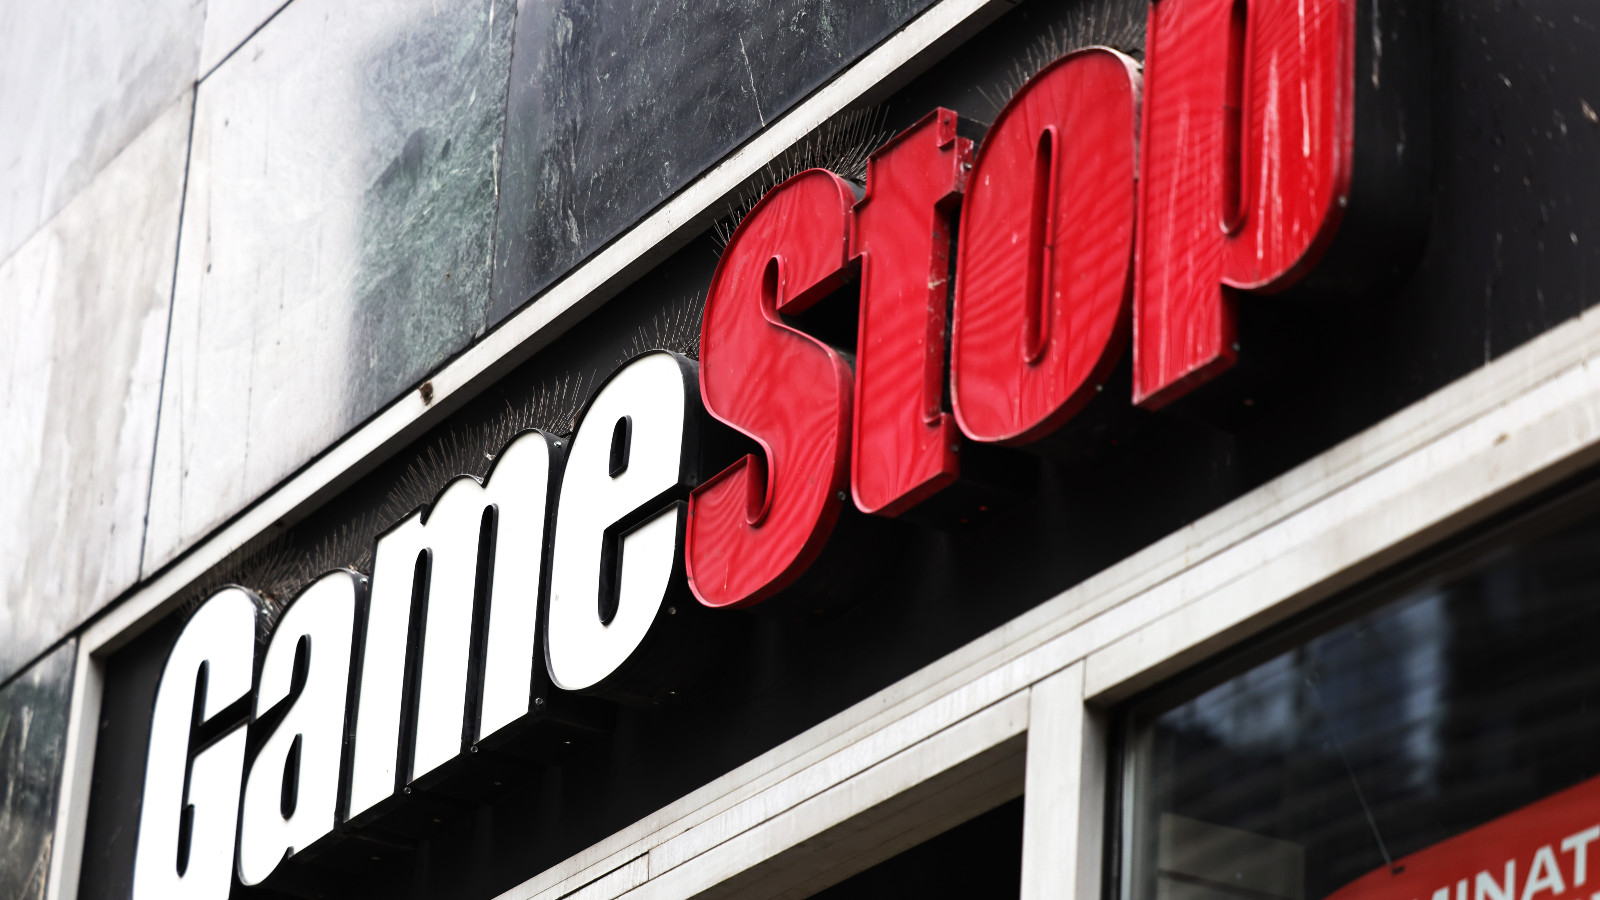 GameStop store signage is seen on January 27, 2021 in New York City. Stock shares of videogame retailer GameStop Corp has increased 700% in the past two weeks due to amateur investors.